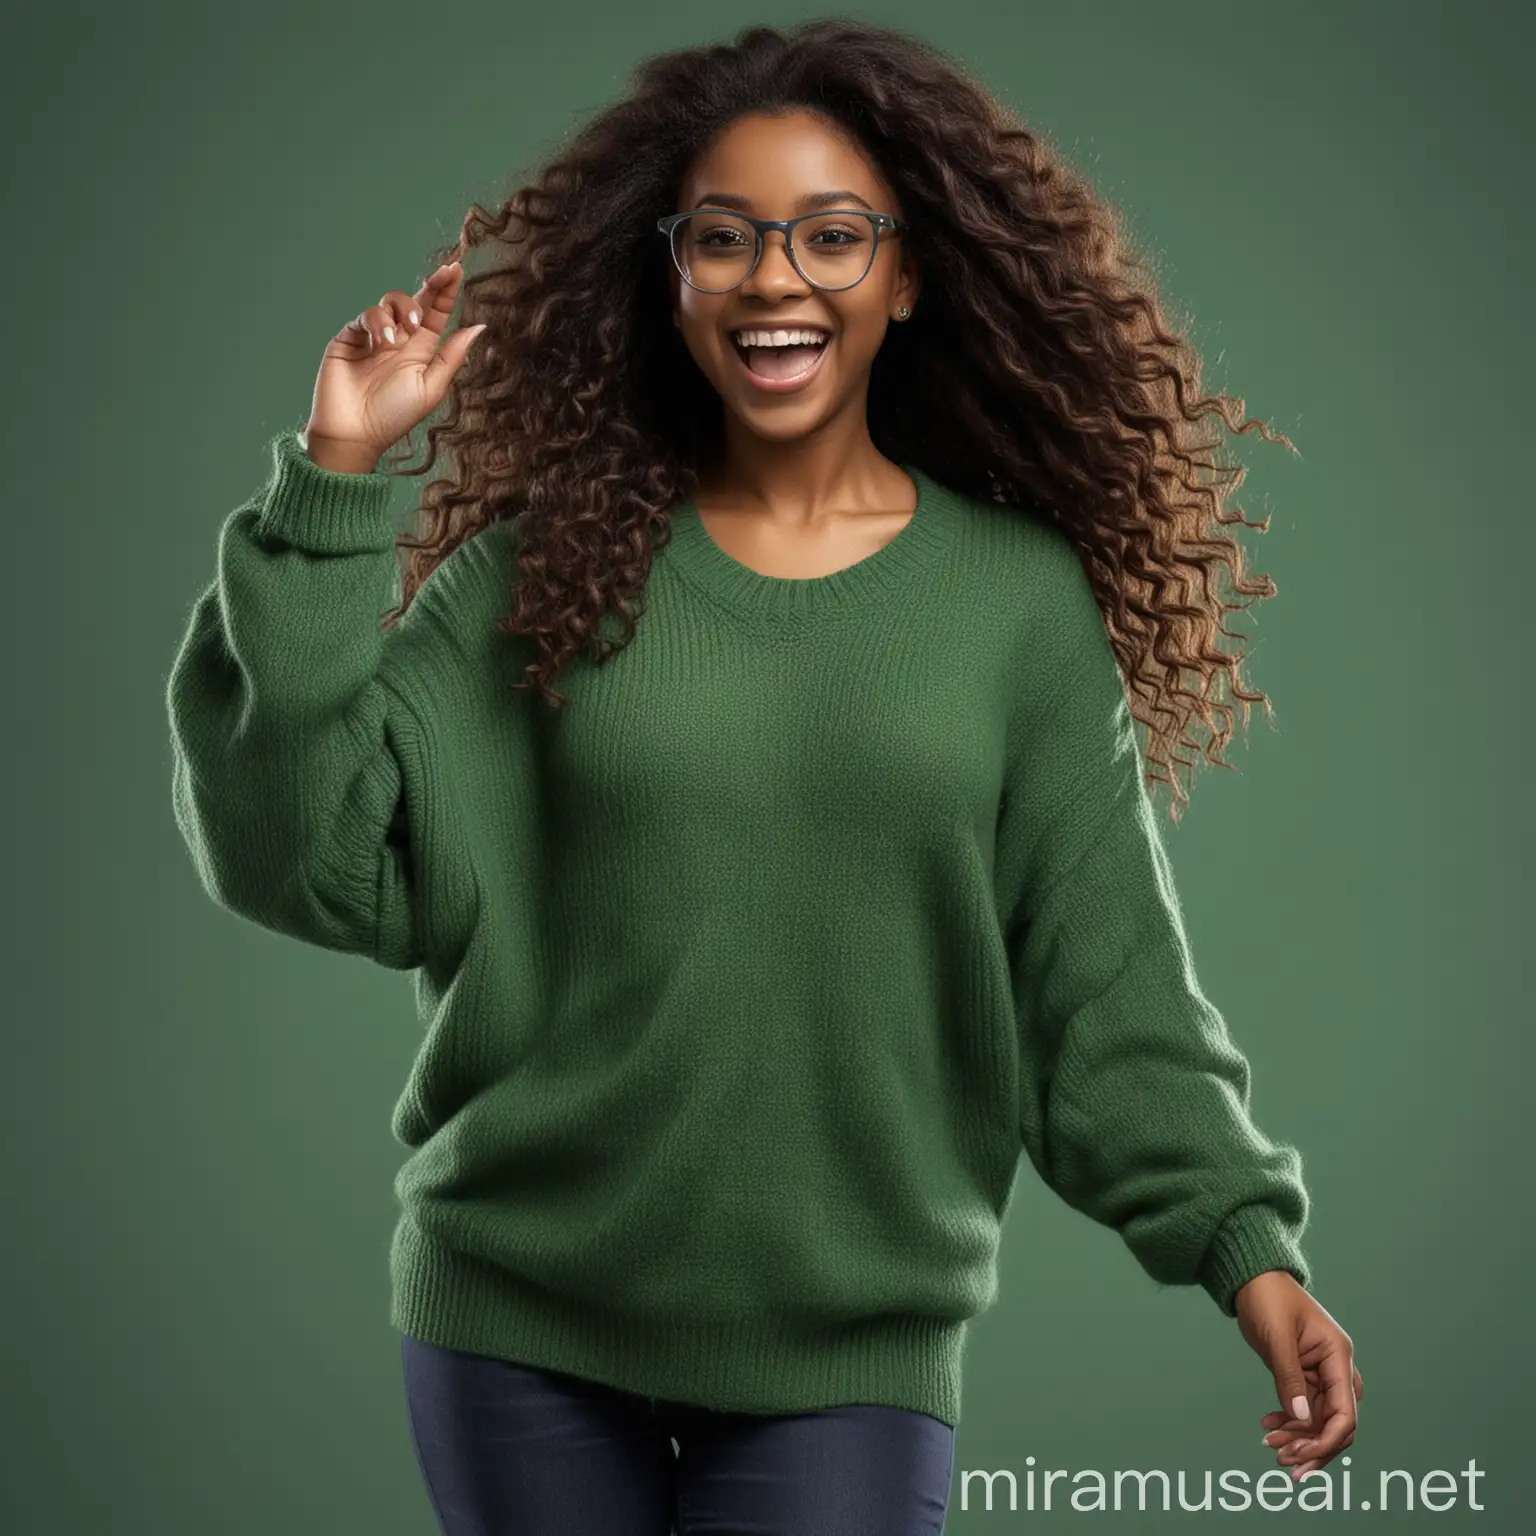 A black lady with long hair and eye glasses, on a green color sweater, smiling beautifully, dancing showing excitement looking directly at the camera, full body view, posing sexually on a dark studio background